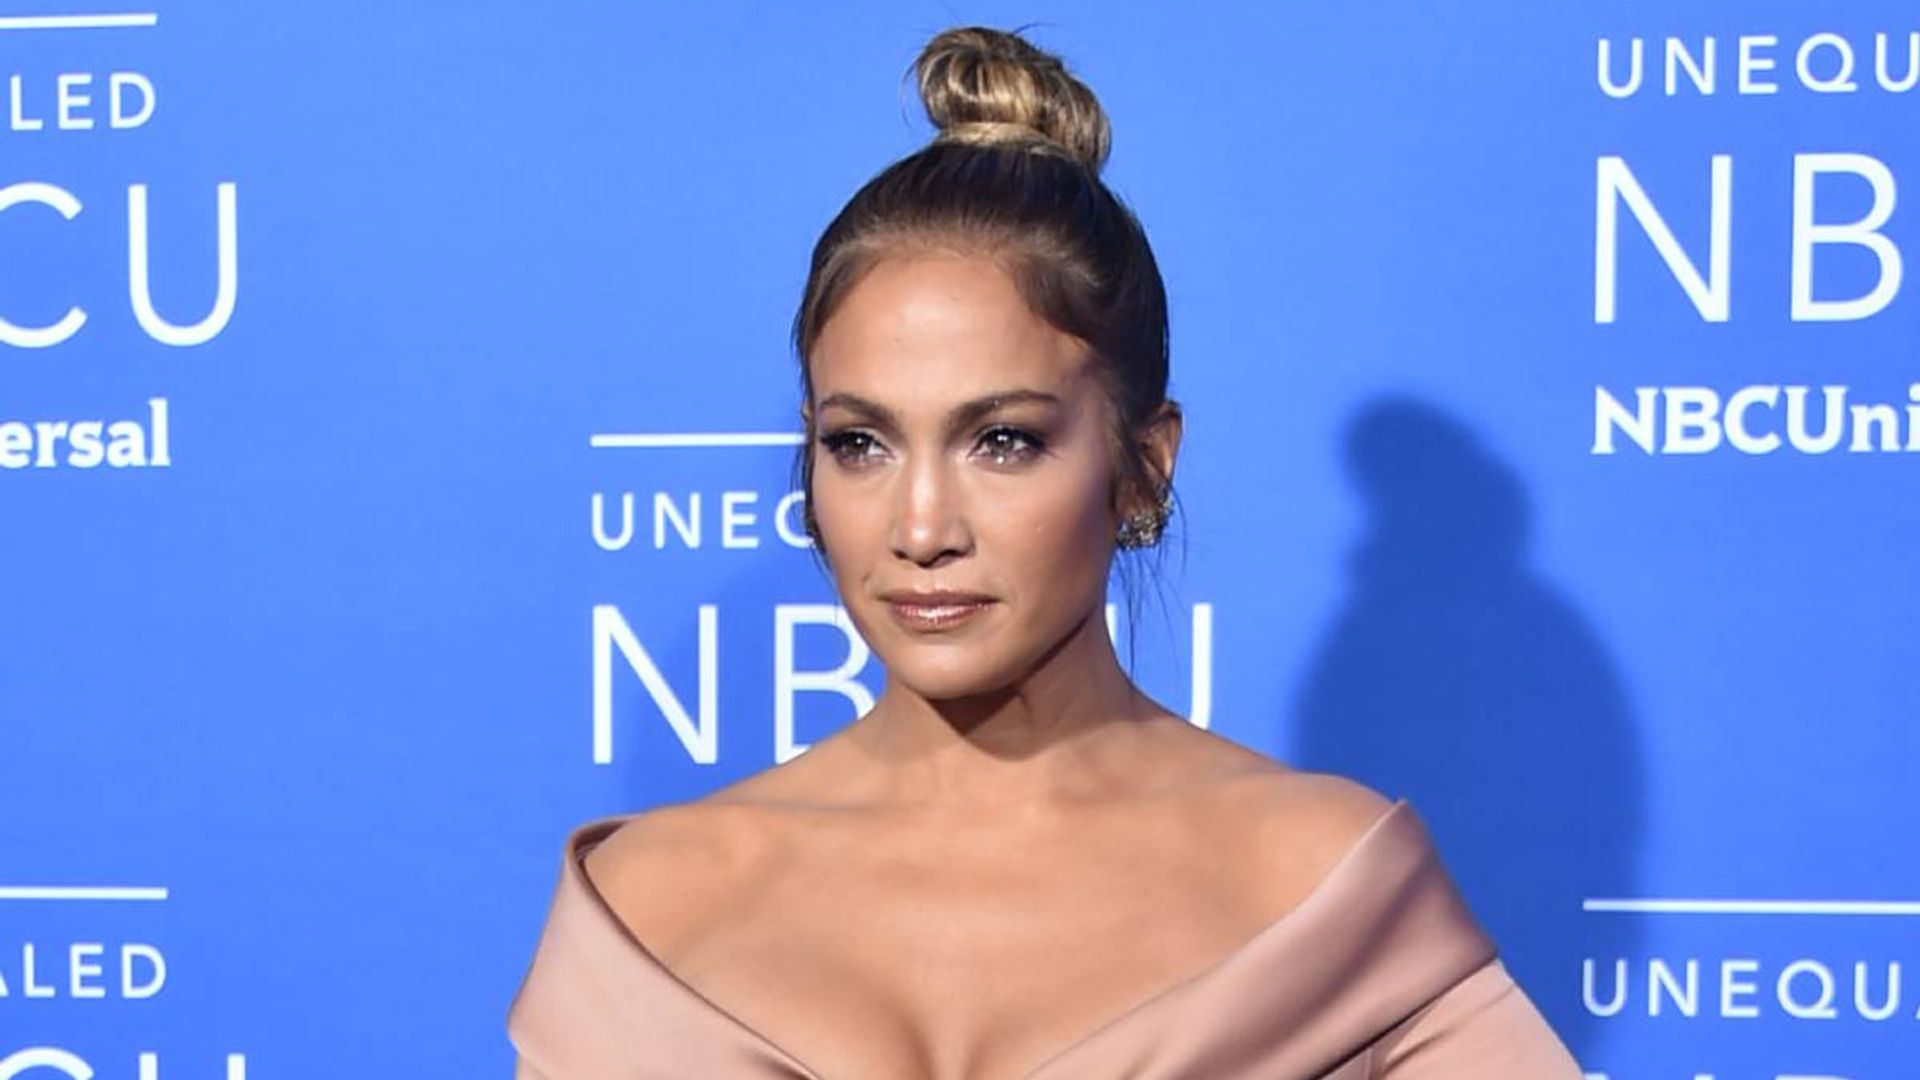 Jennifer Lopez is fierce at 54 as she shares 'first of many' album covers  for new release This Is Me Now